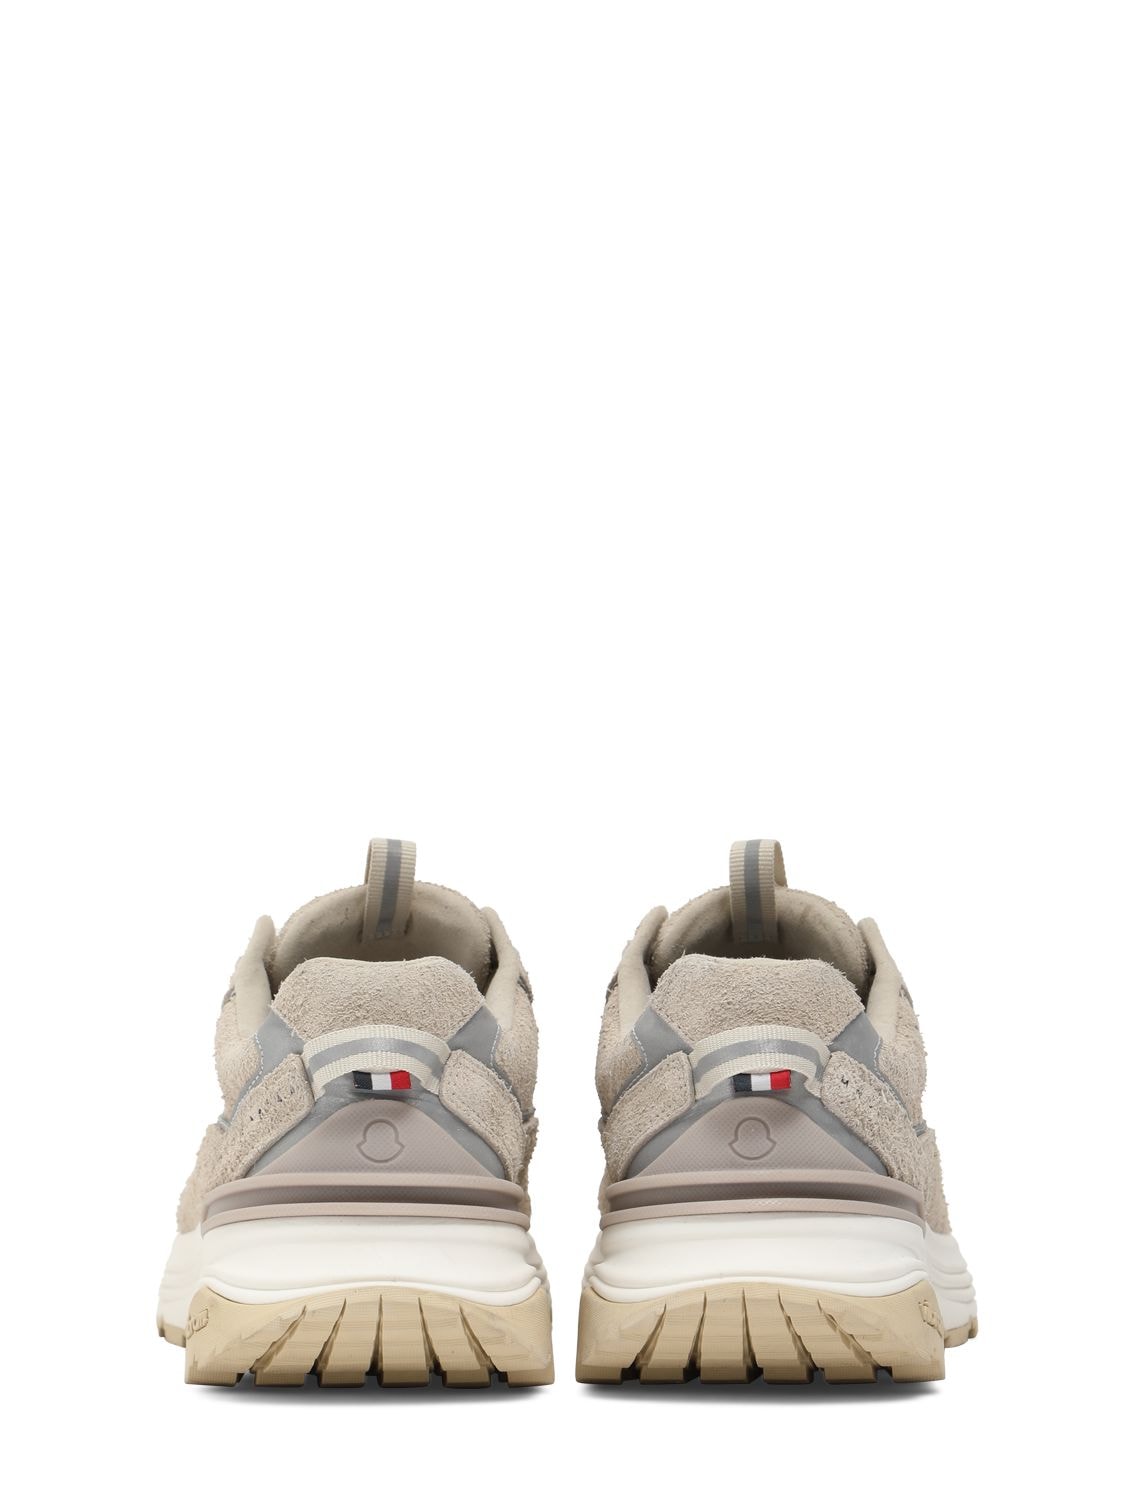 Shop Moncler Lite Leather Runner Sneakers In Beige